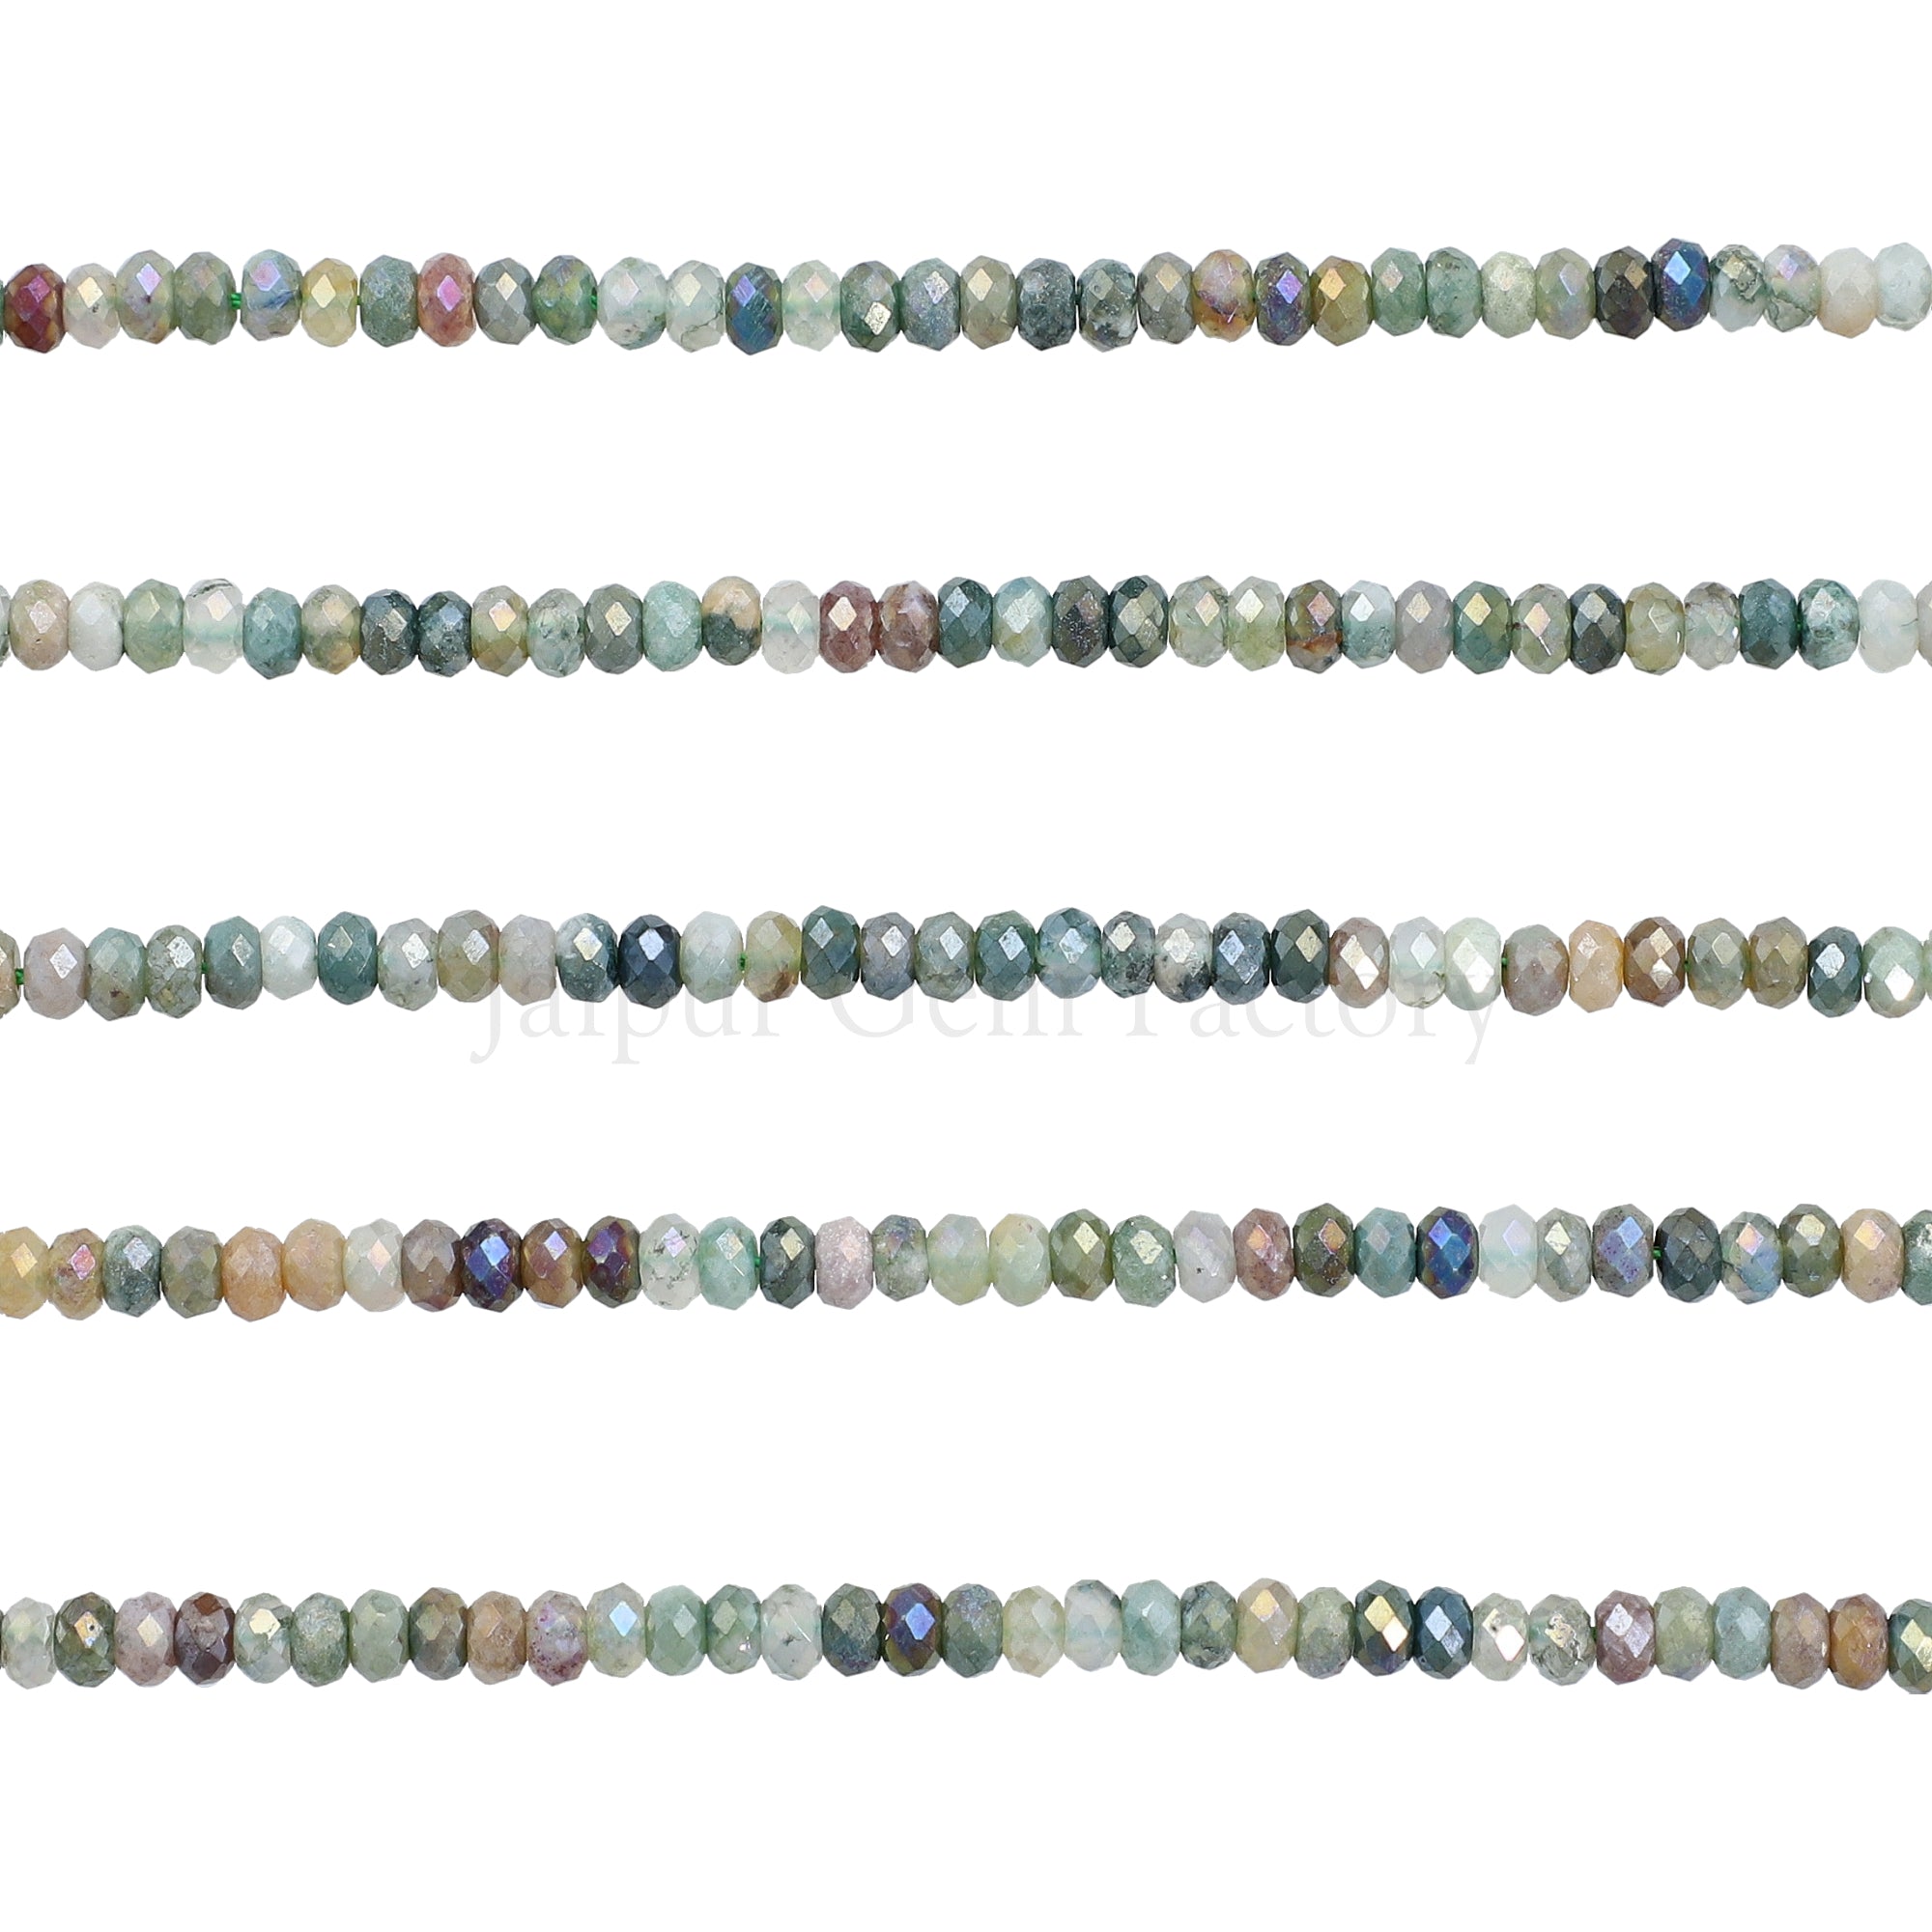 4 MM Mystic Coated Jasper Faceted Rondelle Beads 15 Inches Strand